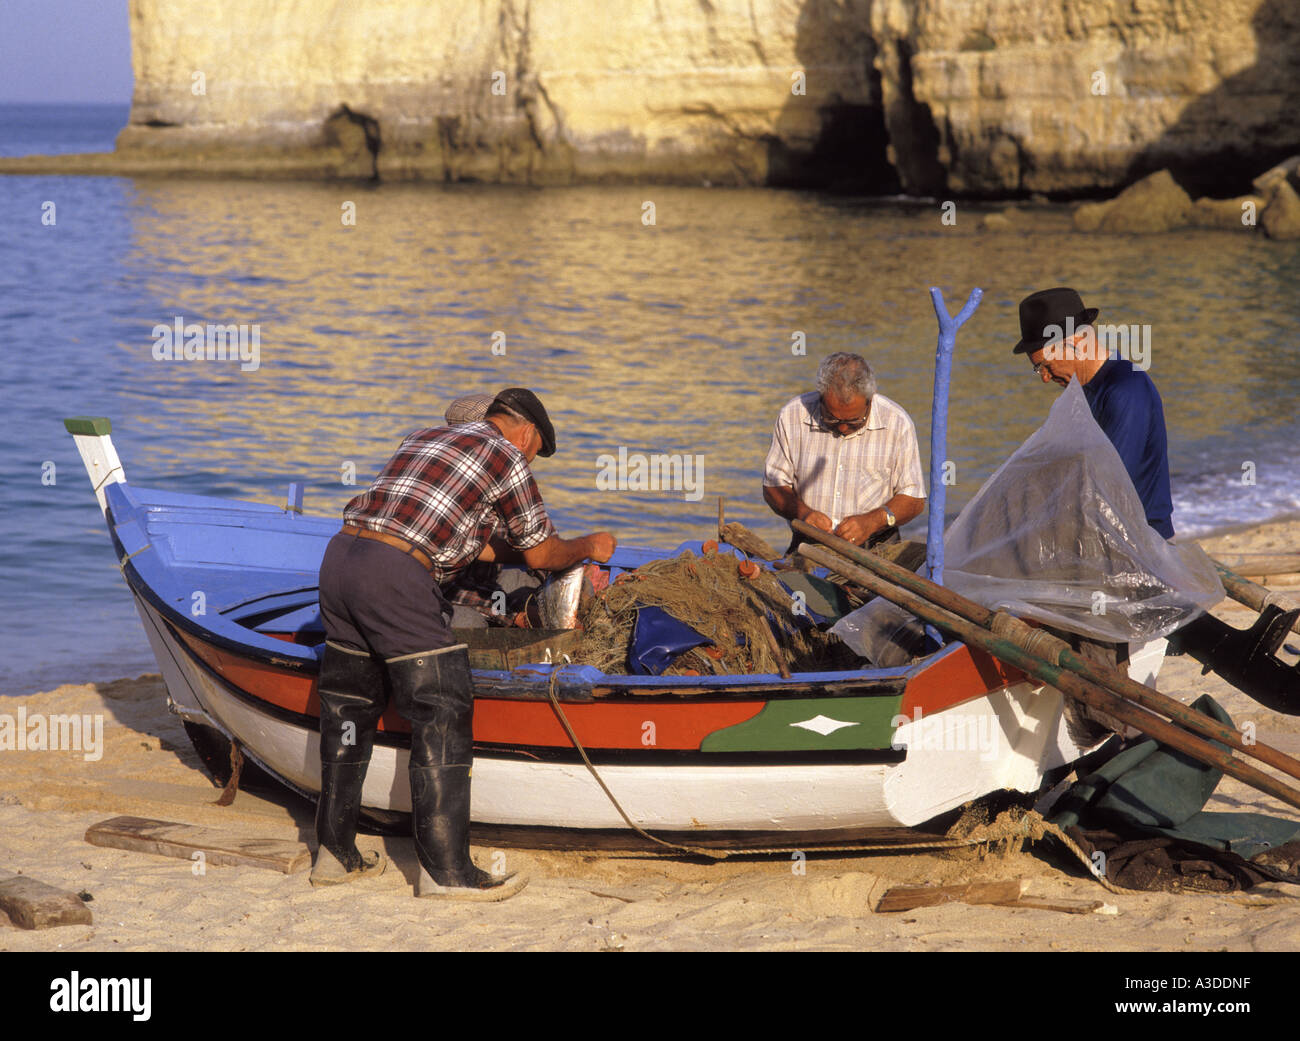 Carvoeiro Algarve Portugal beach Portuguese fisherman at work talking working together at colourful small fishing boat checking repairing fishing nets Stock Photo